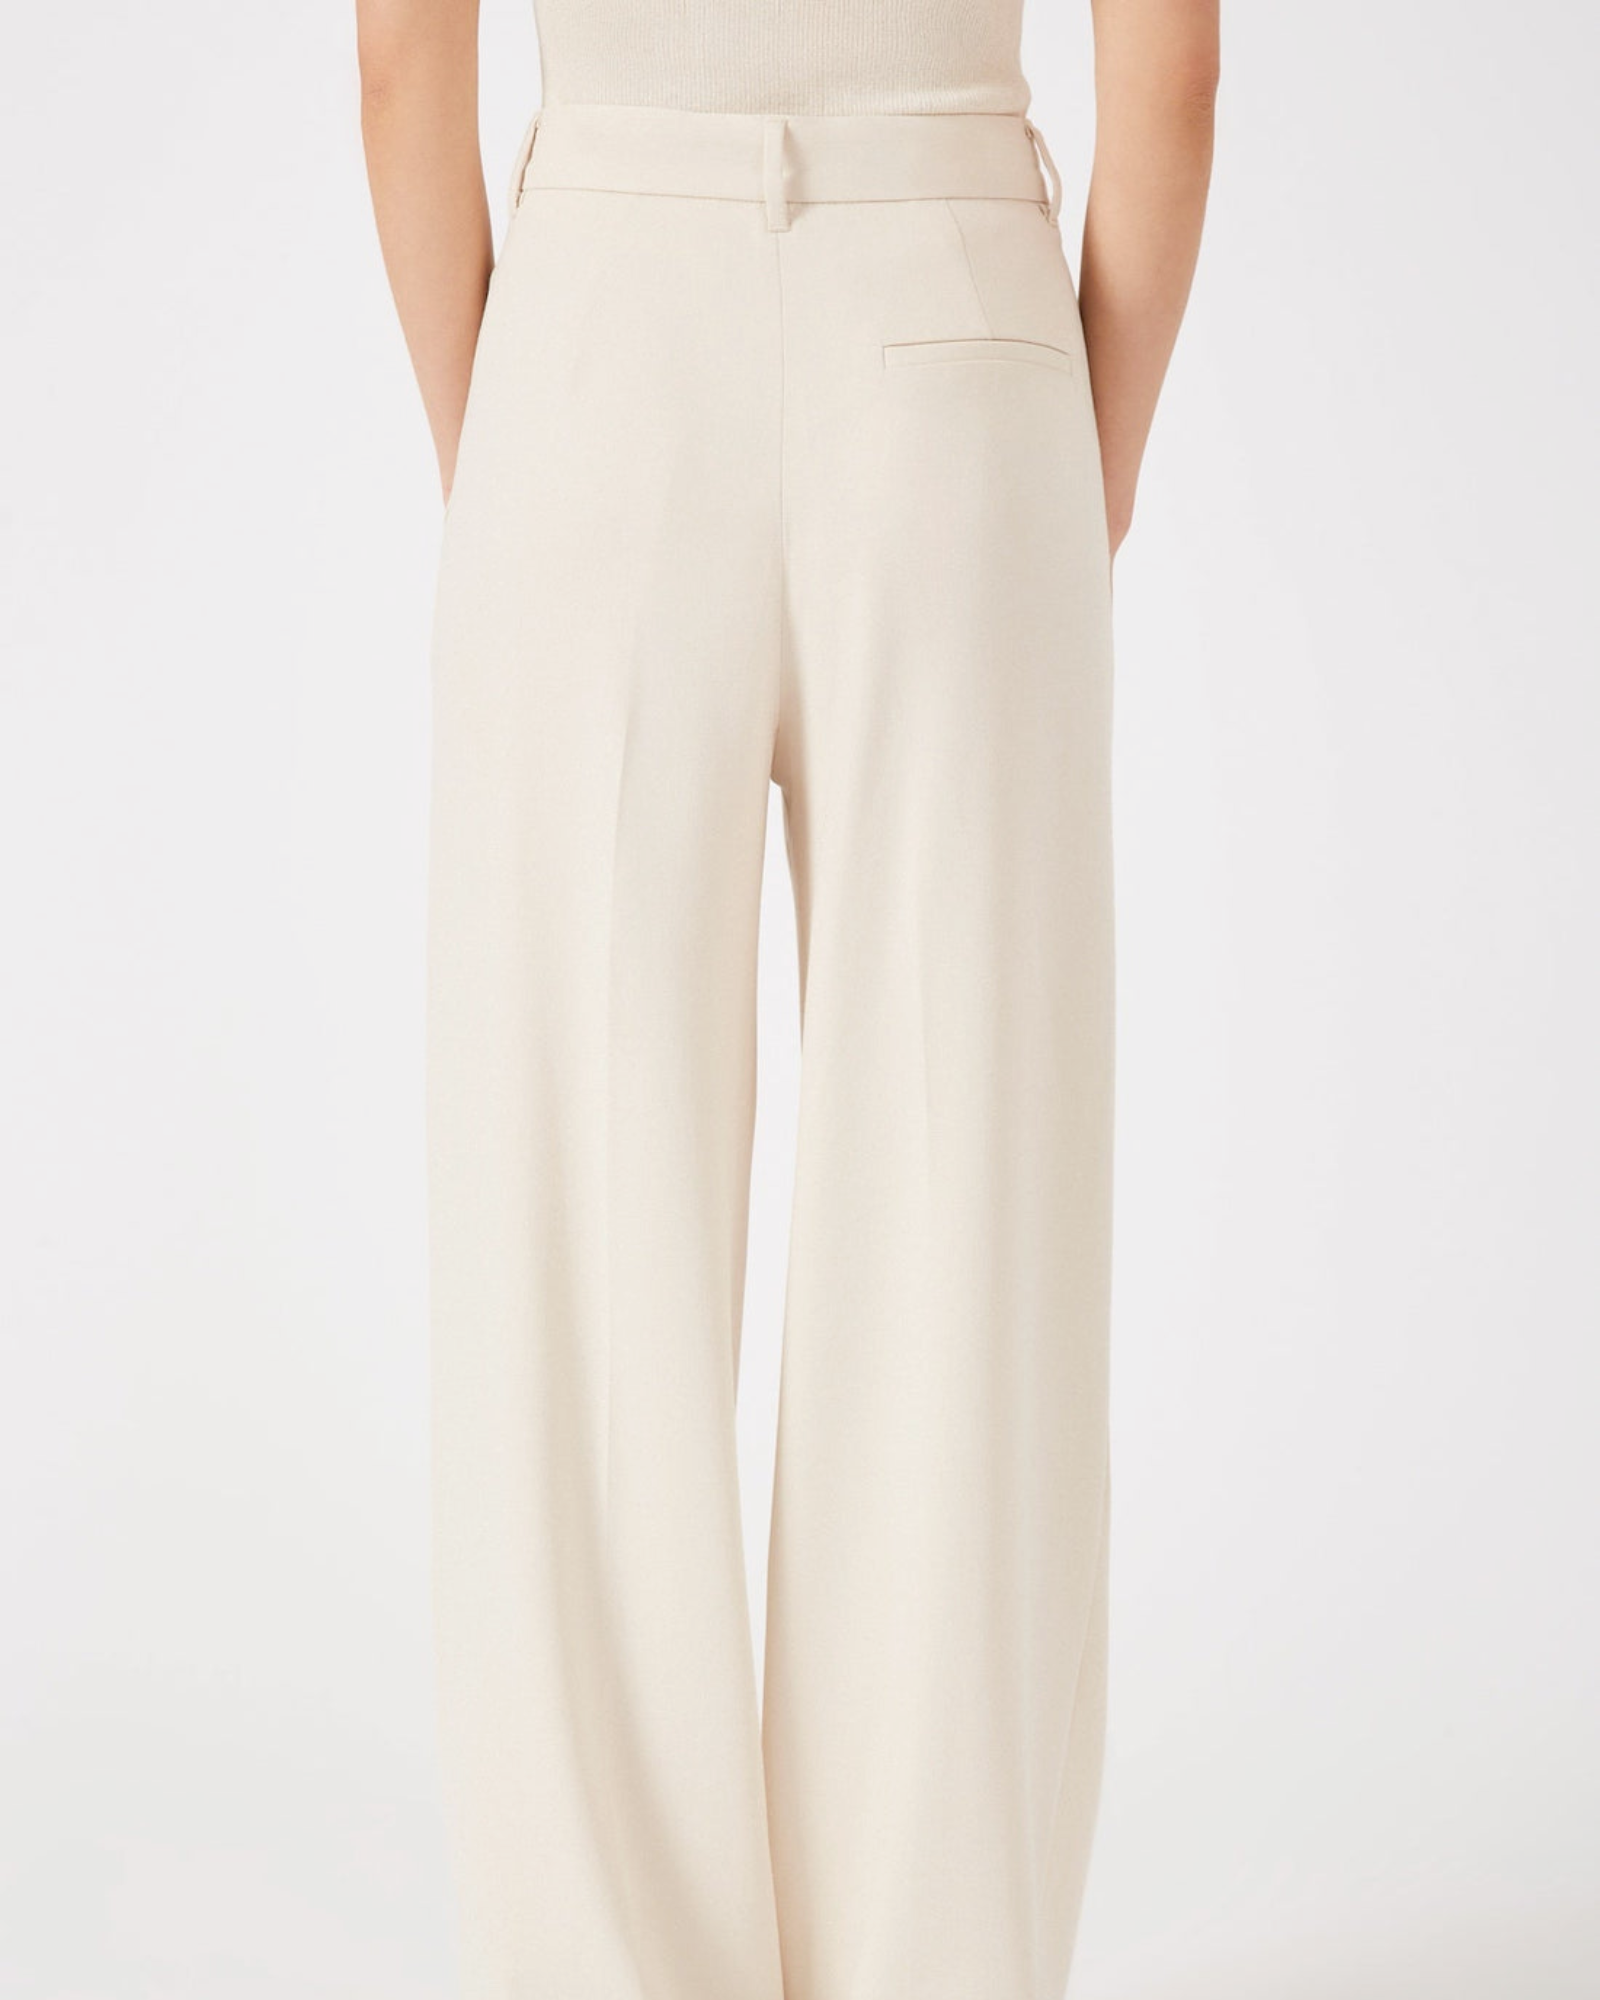 Grey/Ven The Maccaden Pleated Pant in Natural